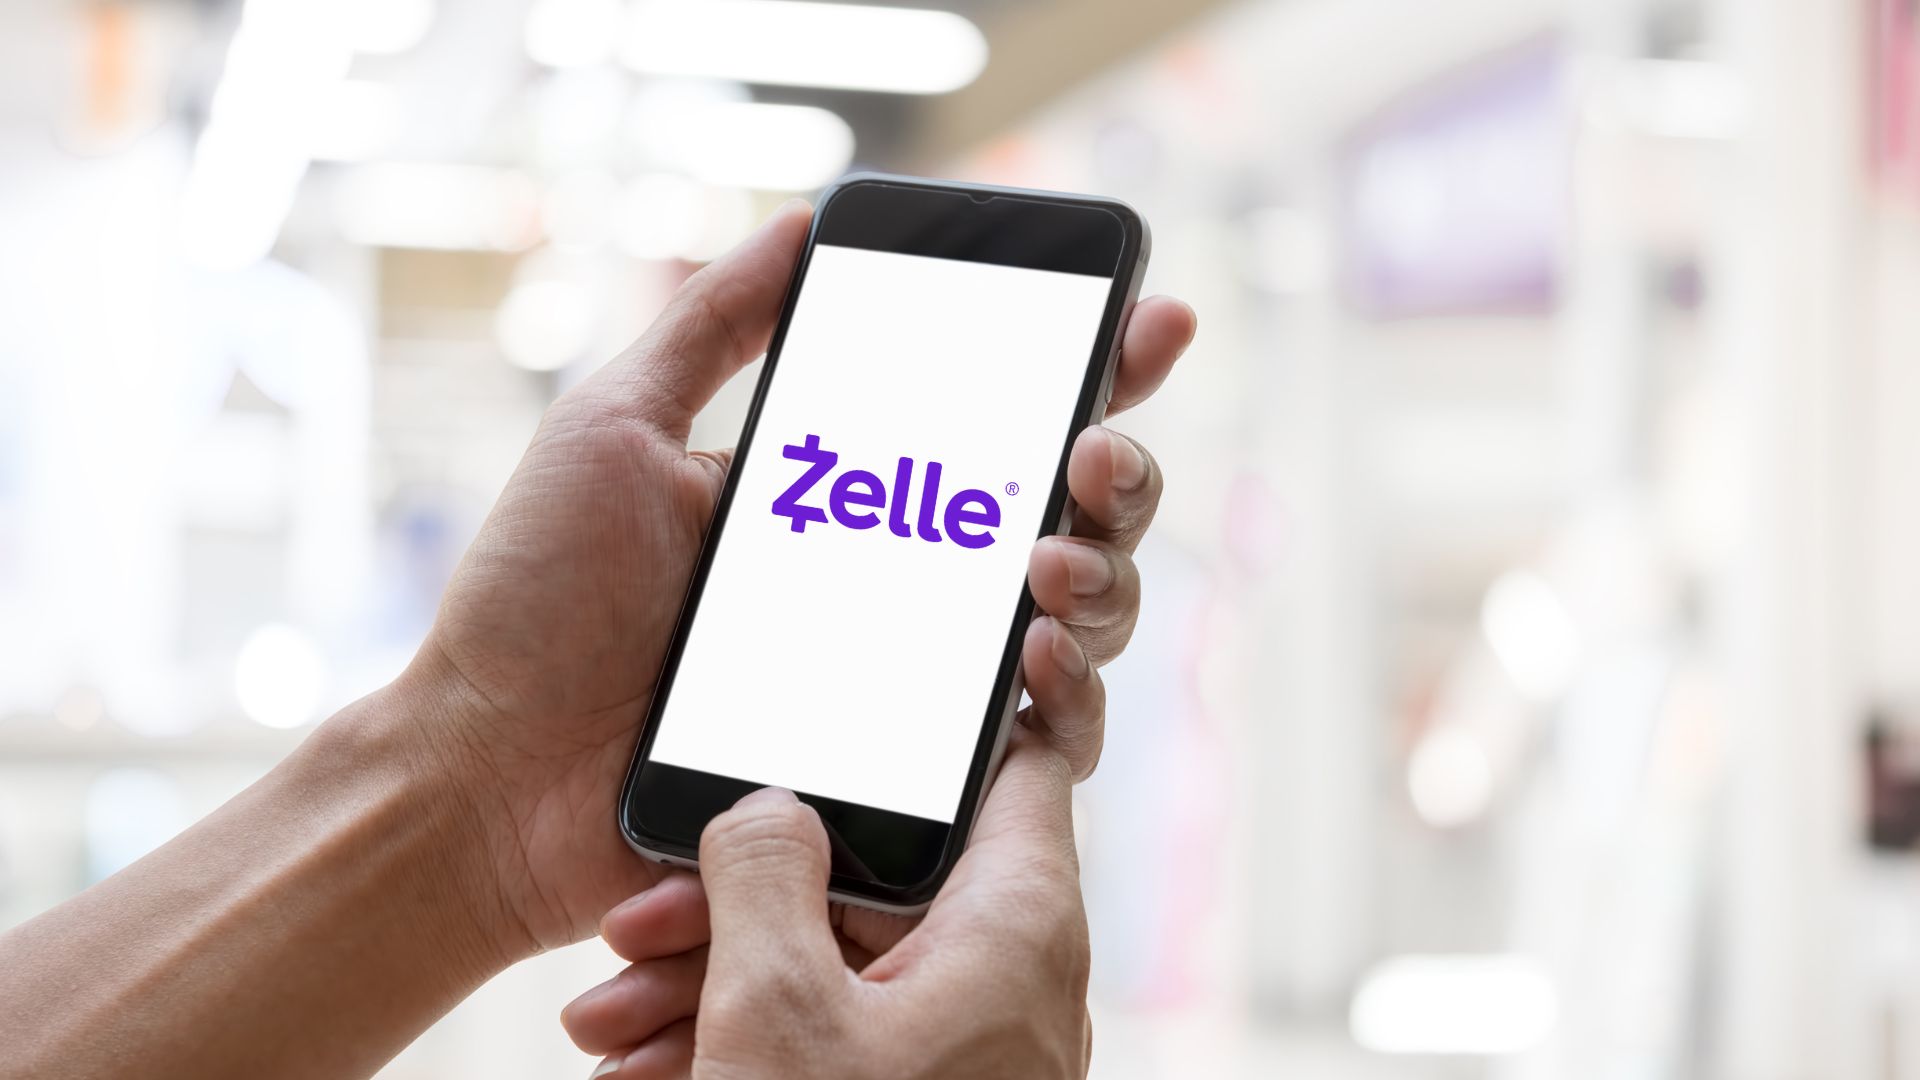 Seven U.S. Banks Reportedly Developing Plan to Repay Zelle Scam Victims